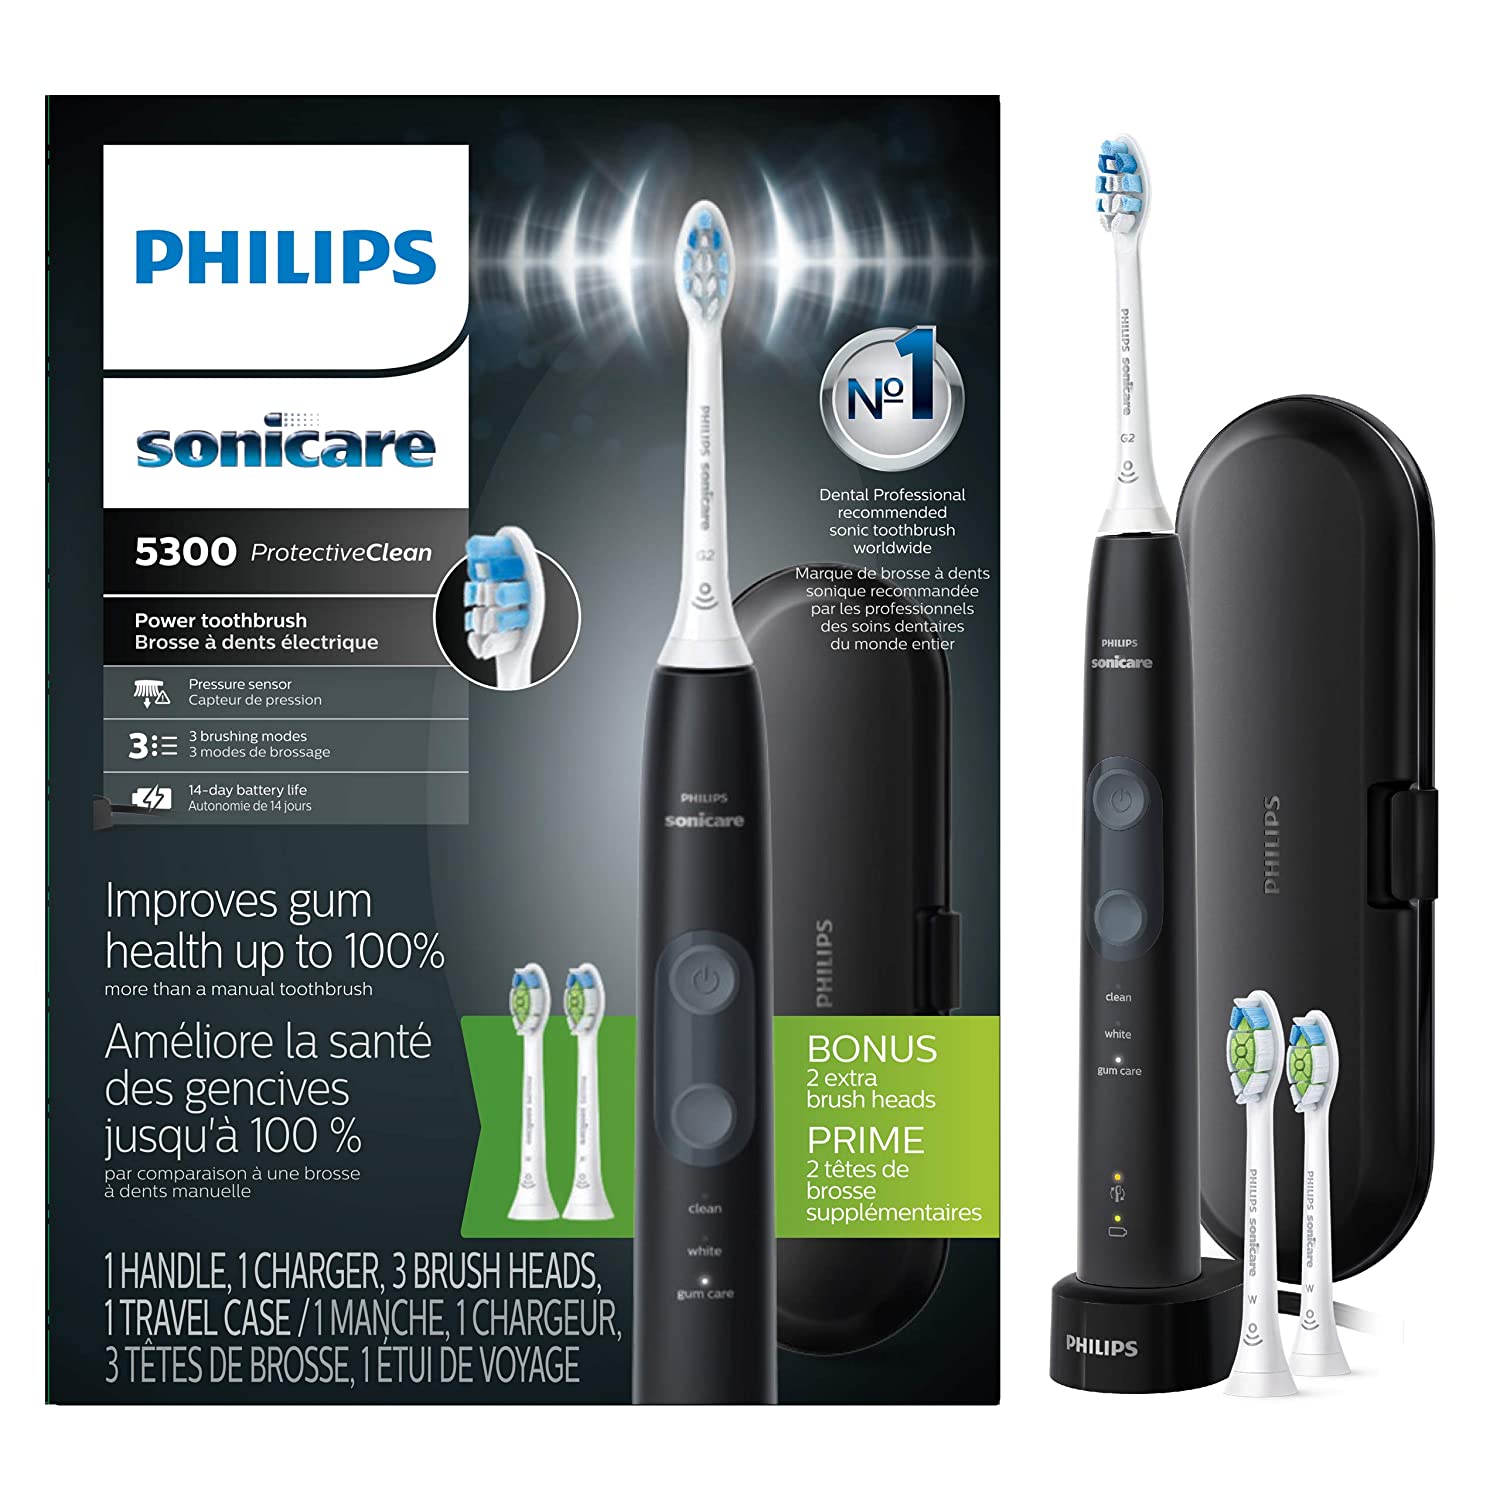 Philips Sonicare HX6423/34 ProtectiveClean 5300 Rechargeable Electric Toothbrush, Black - Pro-Distributing